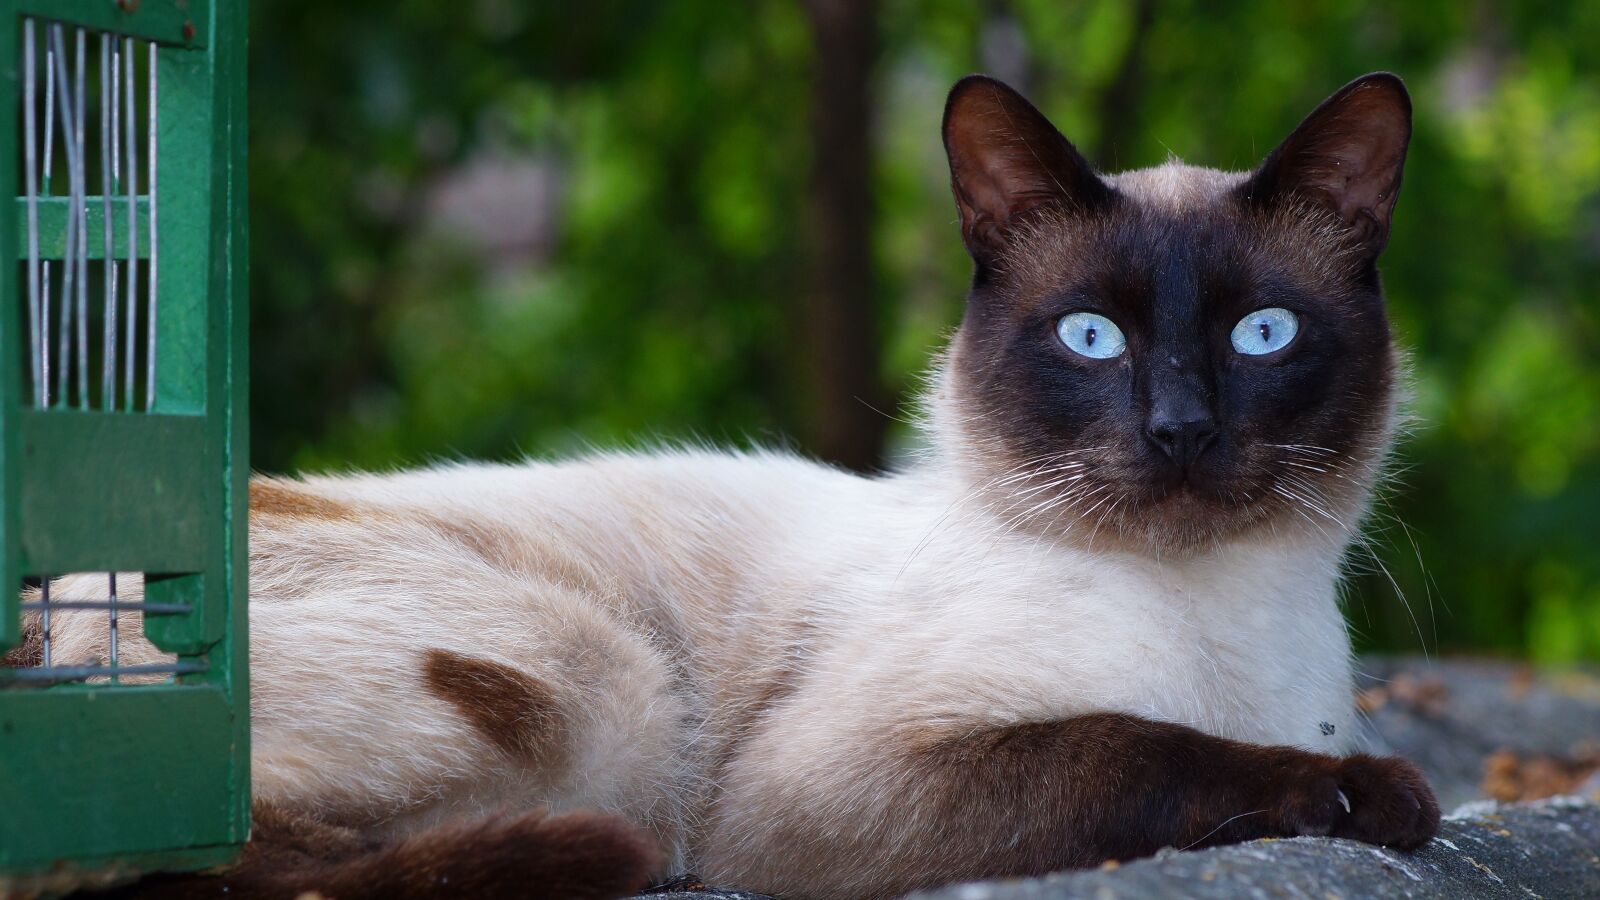 Sony SLT-A77 + Tamron SP AF 90mm F2.8 Di Macro sample photo. Cat, siamese breed, pet photography